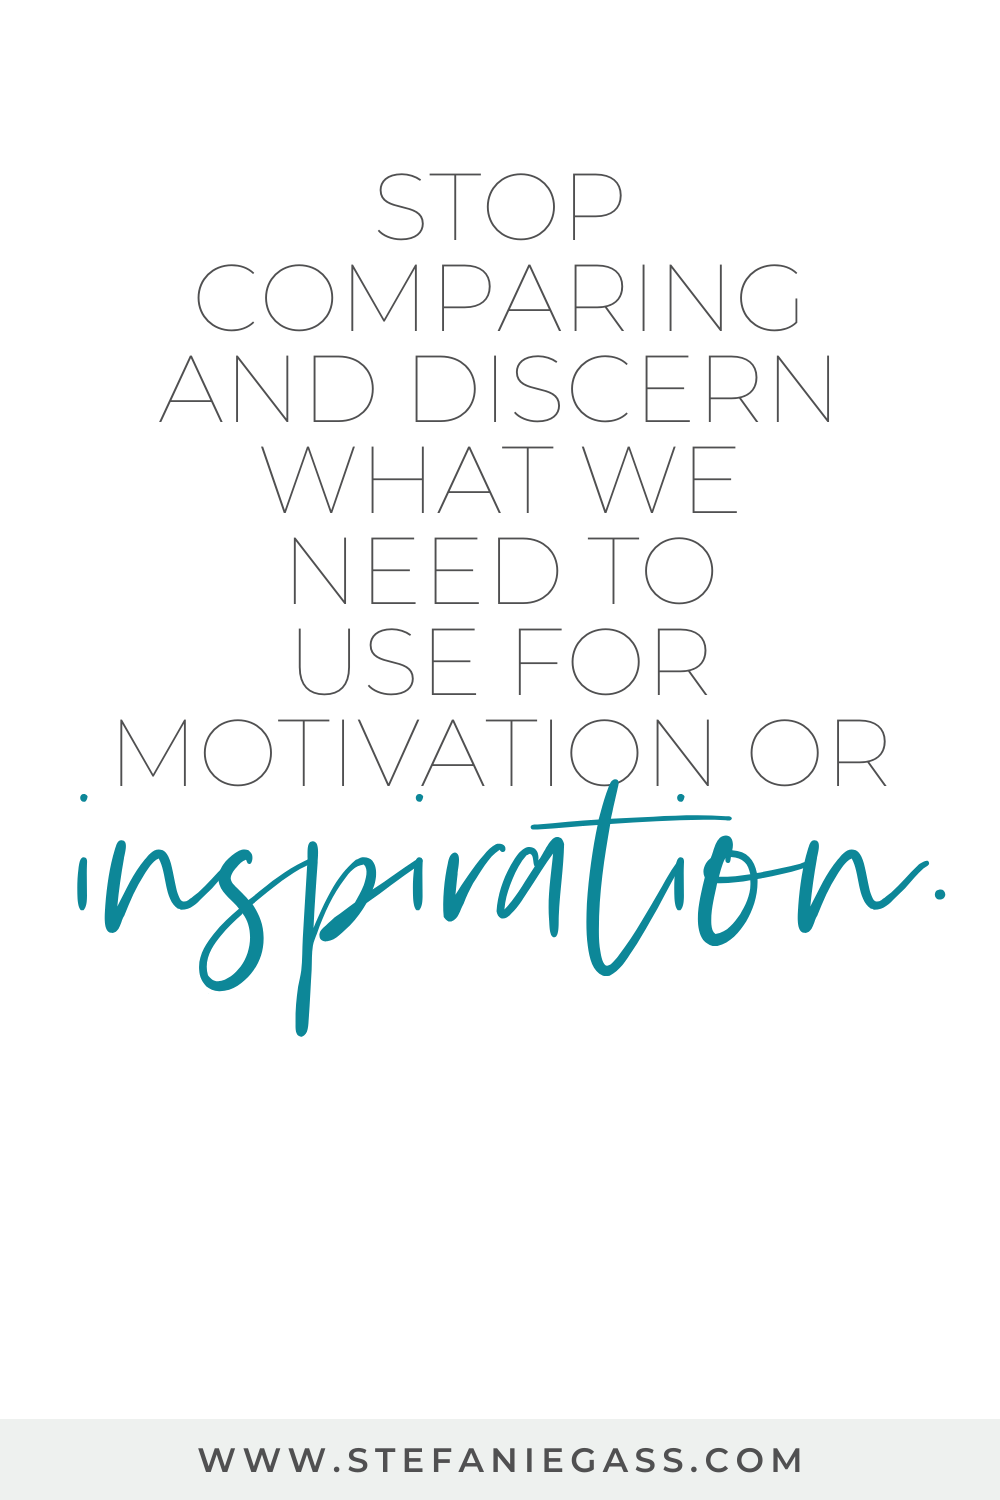 Stefanie Gass Quote: Stop comparing and discern what we need to use for motivation and inspiration.